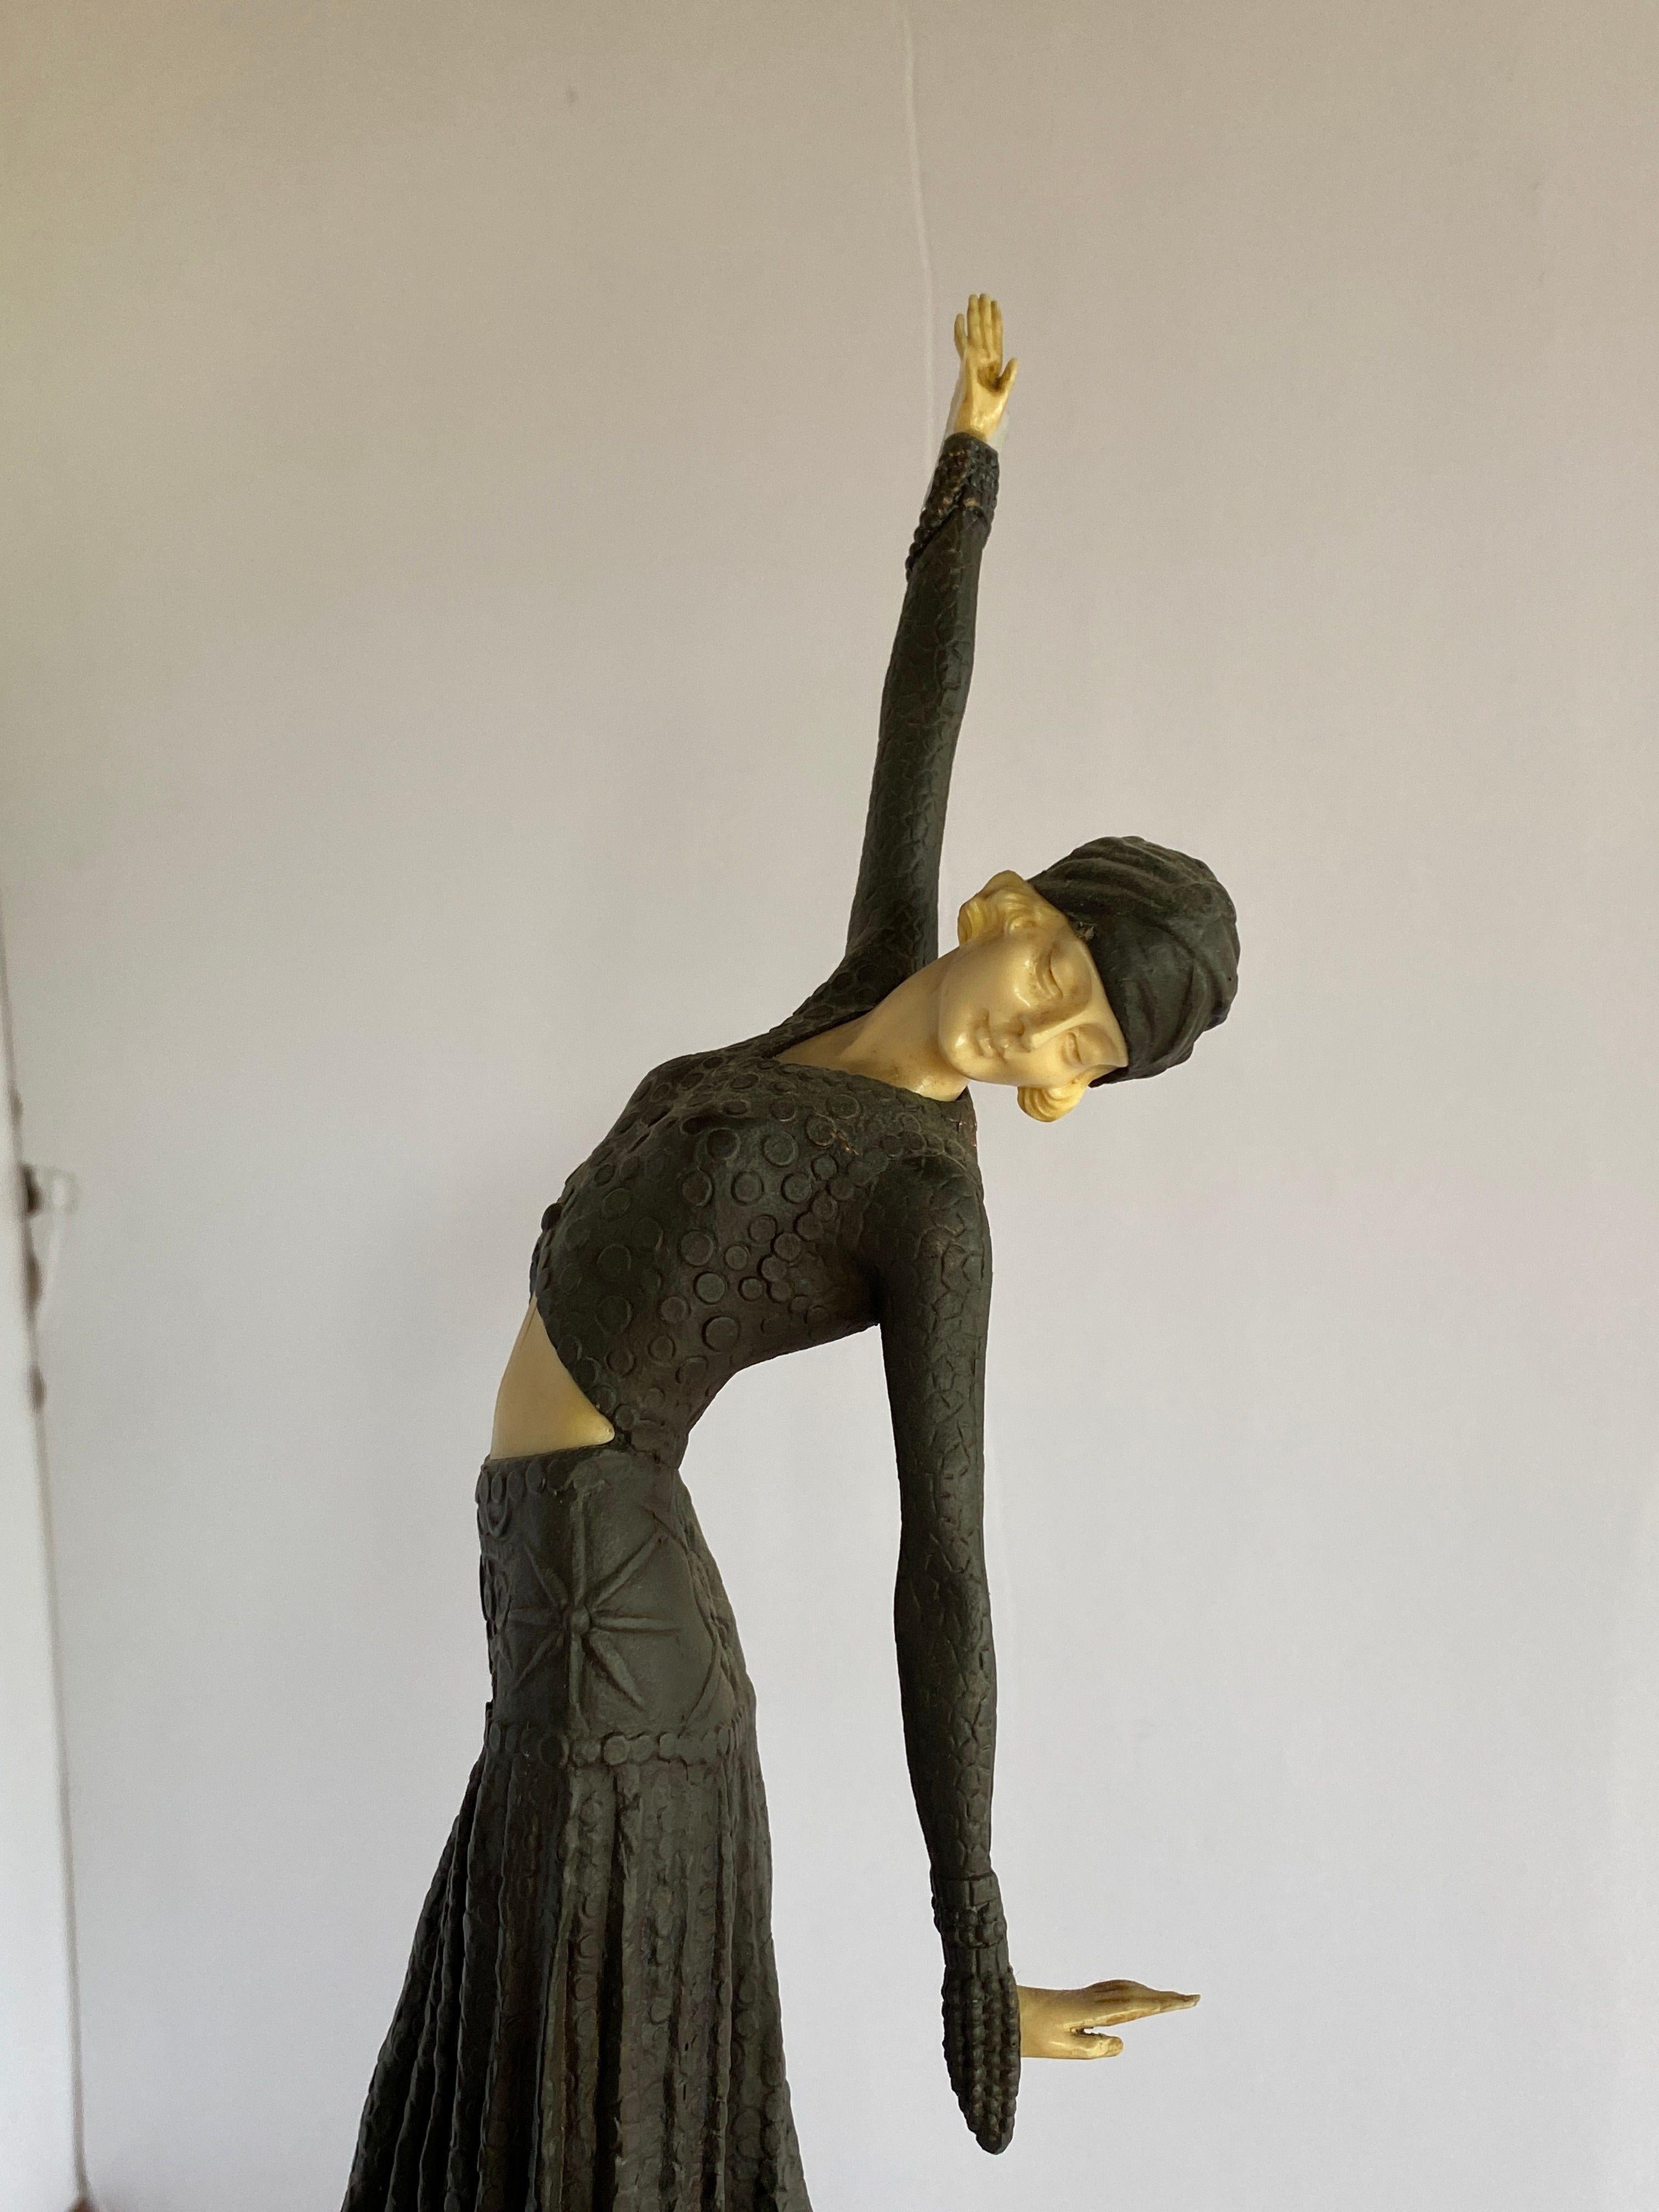 Vintage Art Deco bronze statue featuring a flapper dancer fashioned after Chiparus with a bronze body and bone face, feet, and hands. The statue stands on a large stepped abase made from multi-colored marble.

Circa 1920.